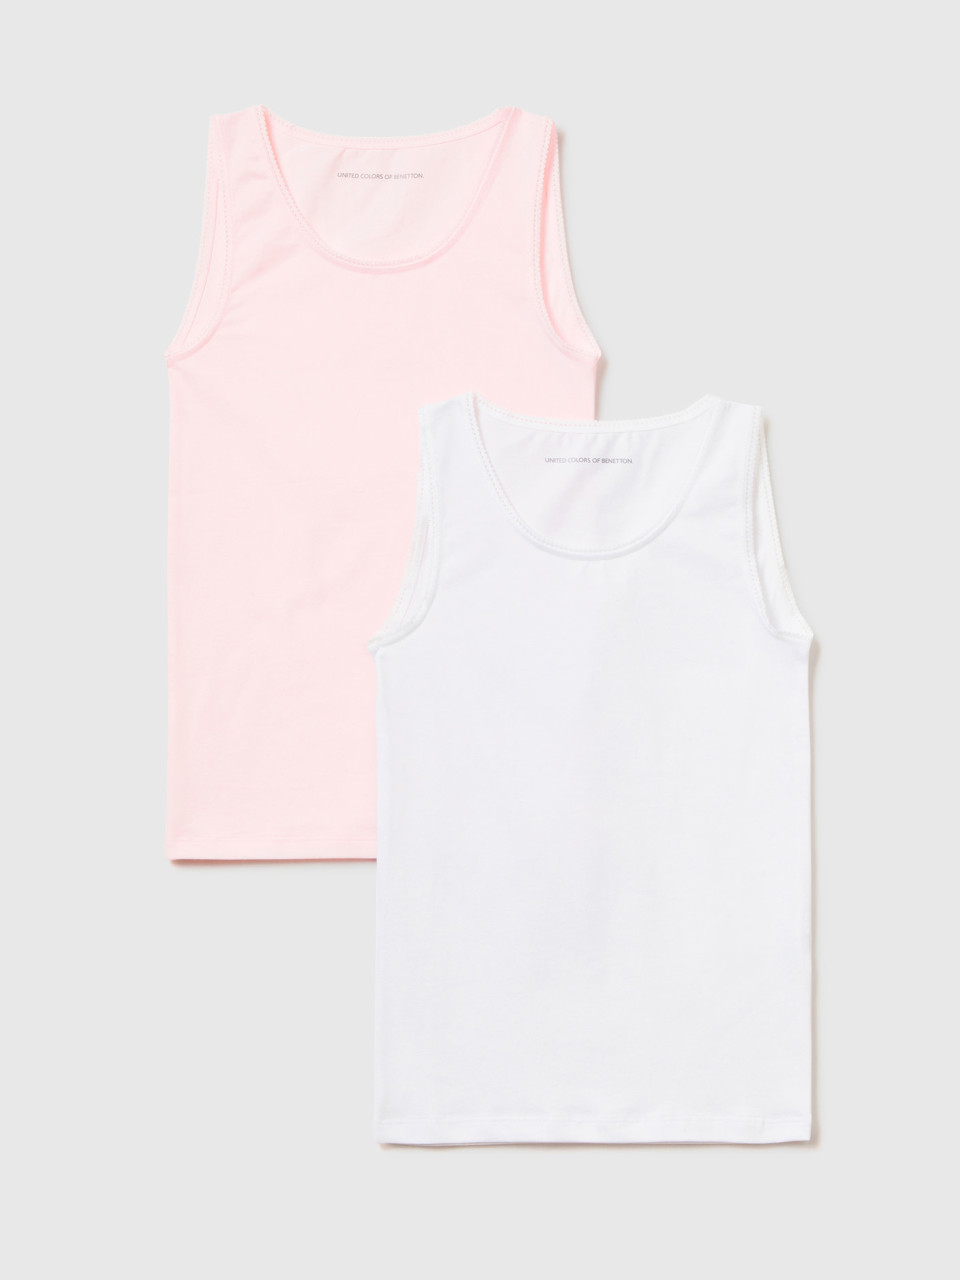 Benetton, Two Tank Tops In Stretch Cotton, Multi-color, Kids